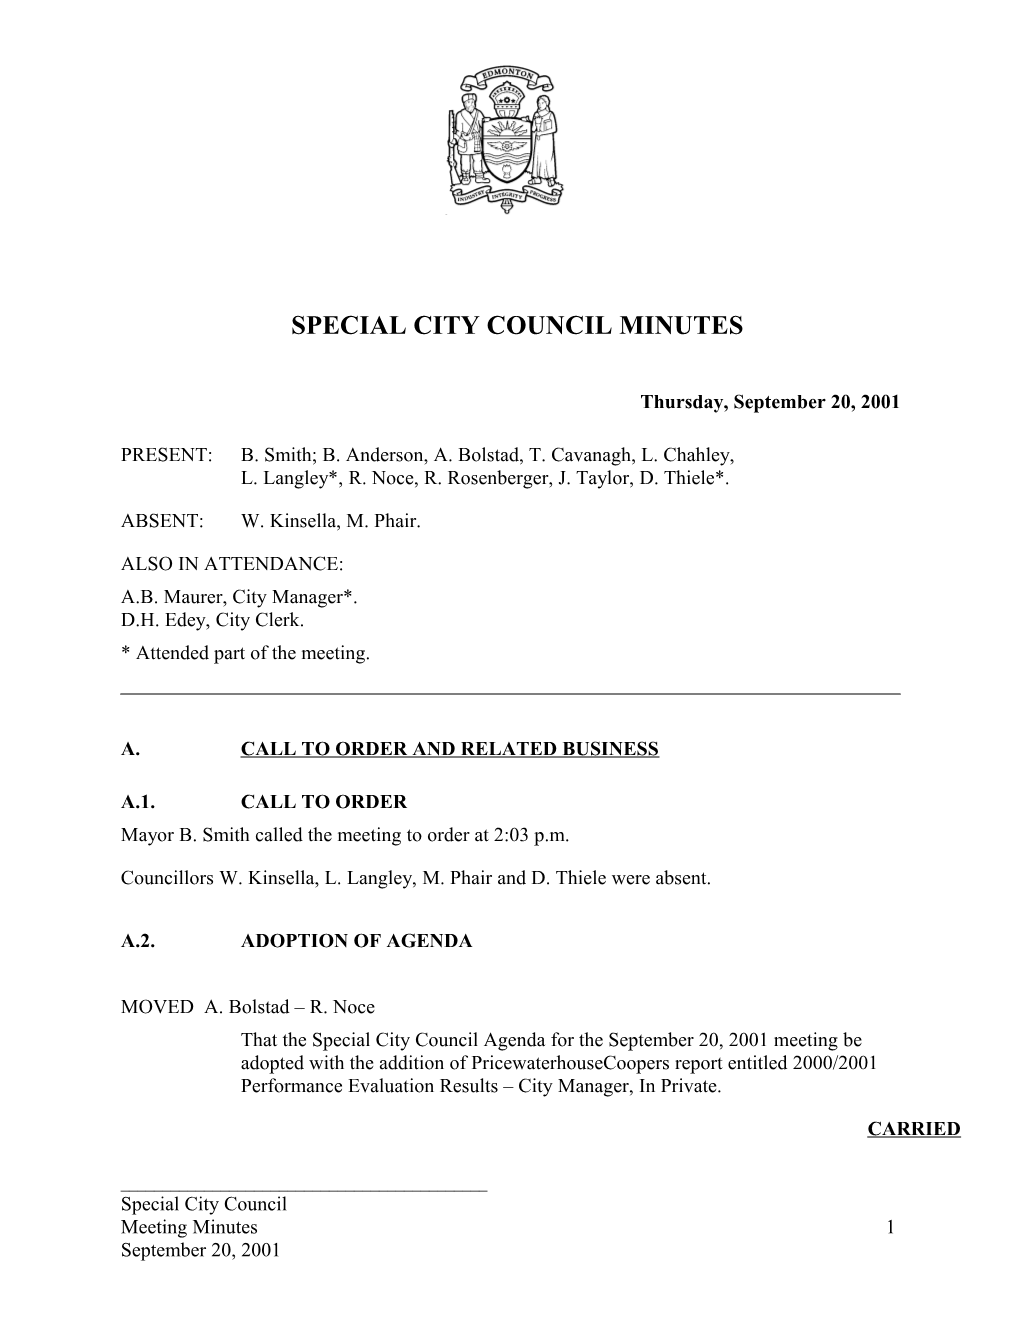 Minutes for City Council September 20, 2001 Meeting